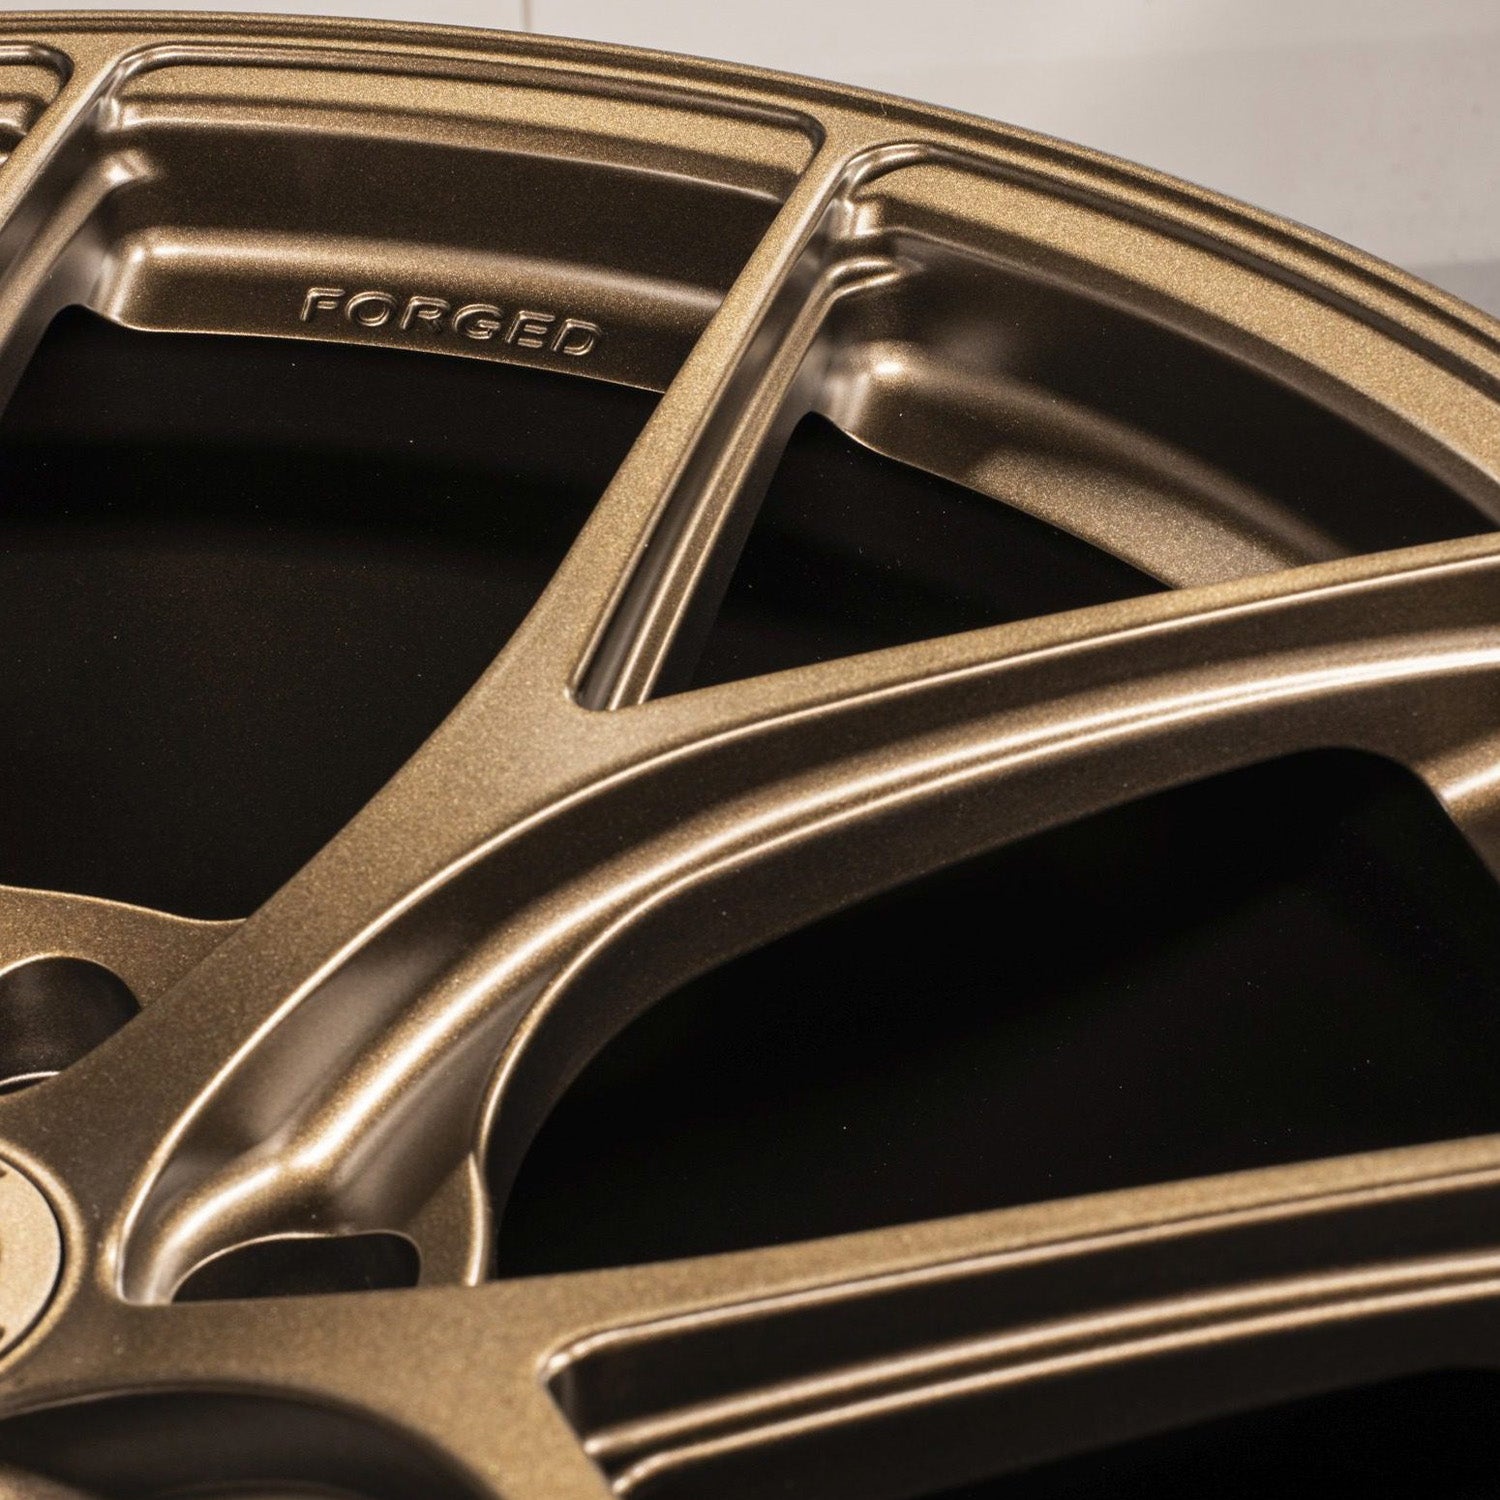 Bola FP2 19" Forged Alloy Wheels In Matte Bronze OEM Sizing